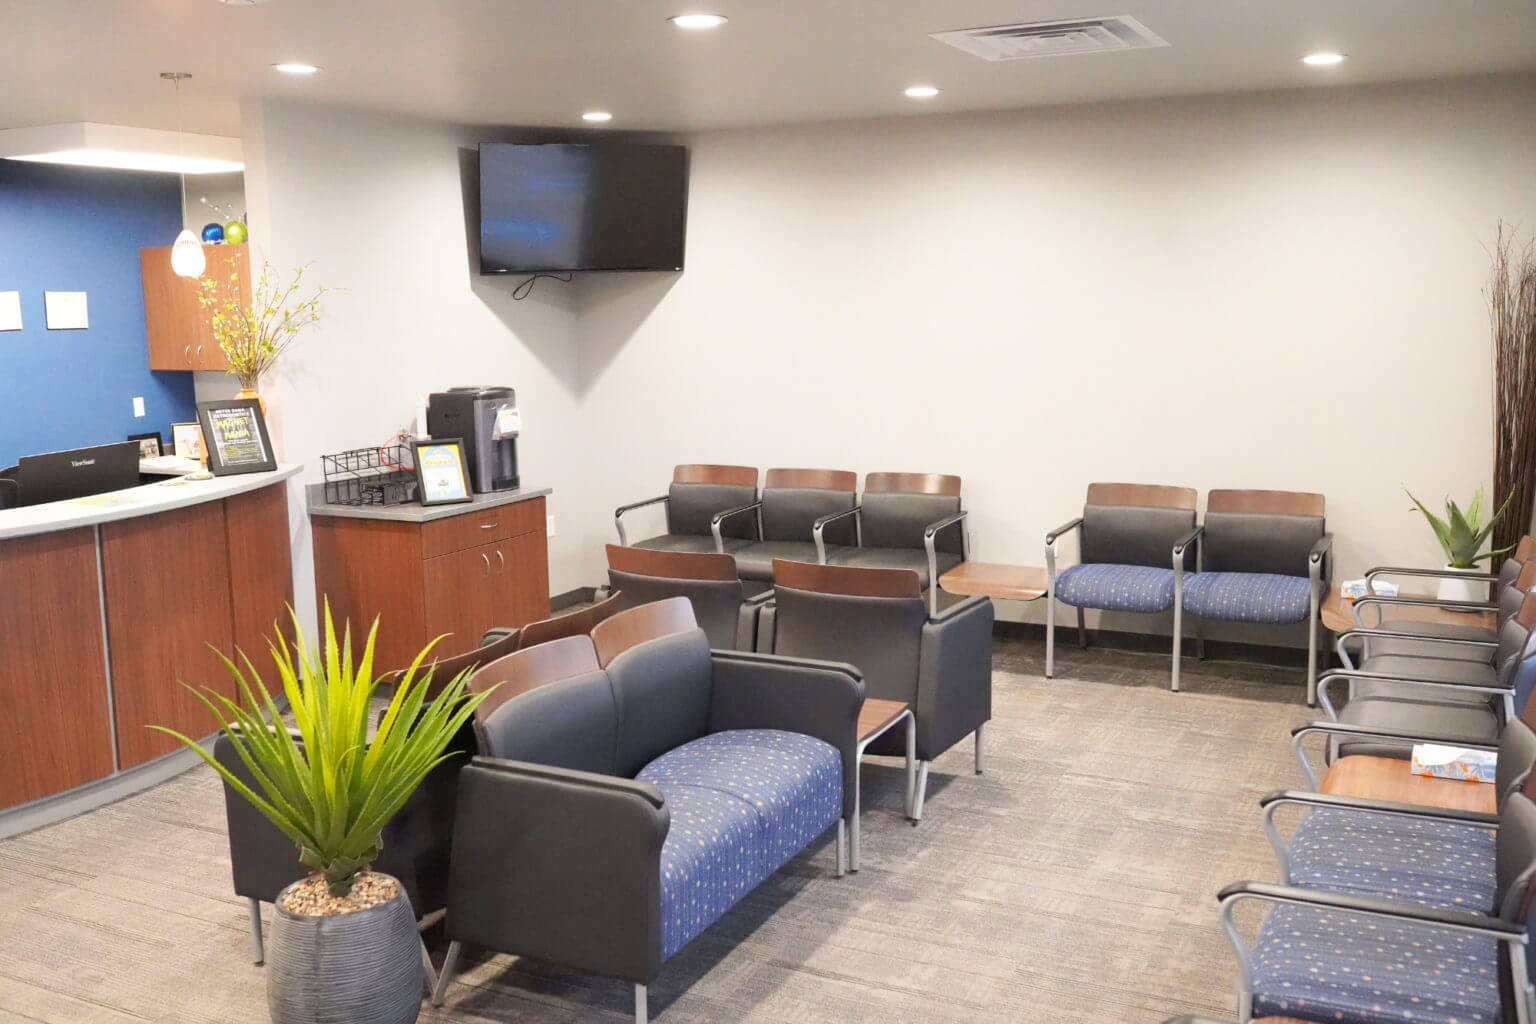 Waiting room for orthodontic treatment - South Dakota Orthodontist - Wyoming Orthodontist